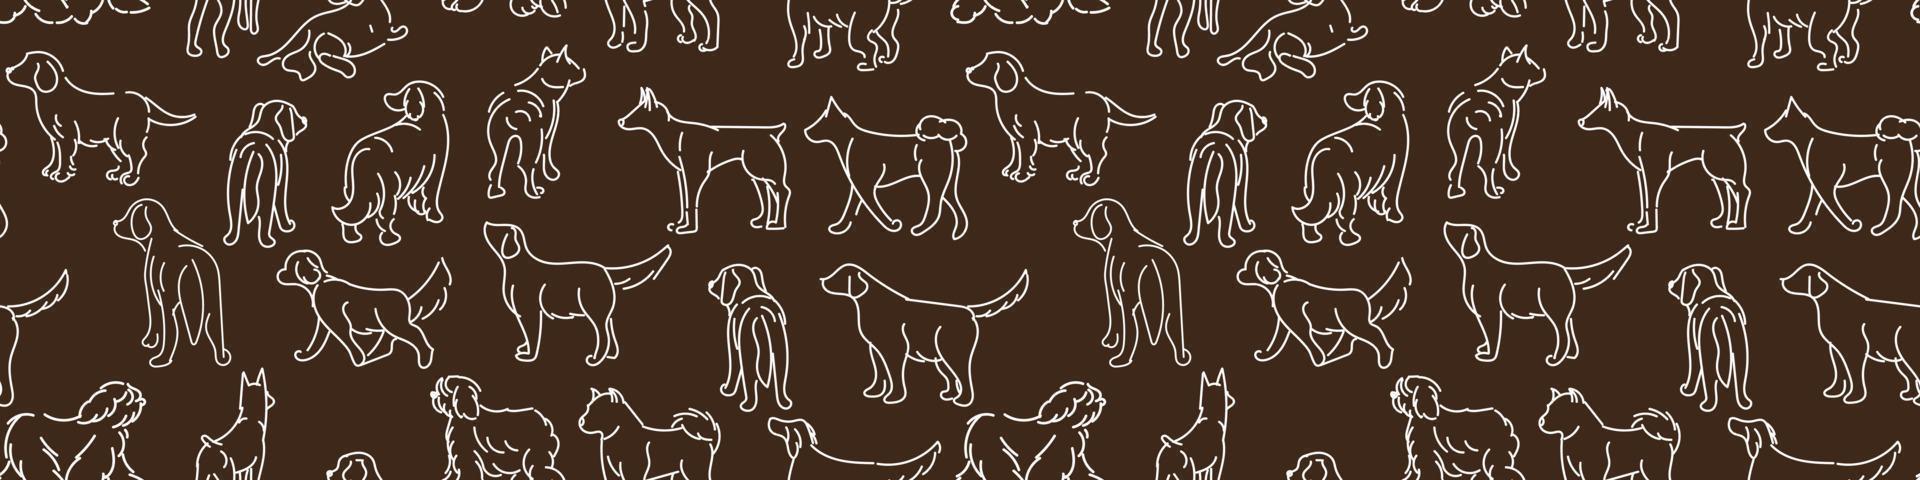 Pattern black Drawing with dogs in different poses. Line graphics on a dark background. Light lines on dark. Suitable for printing on paper and textiles. Gift wrapping, clothing. vector